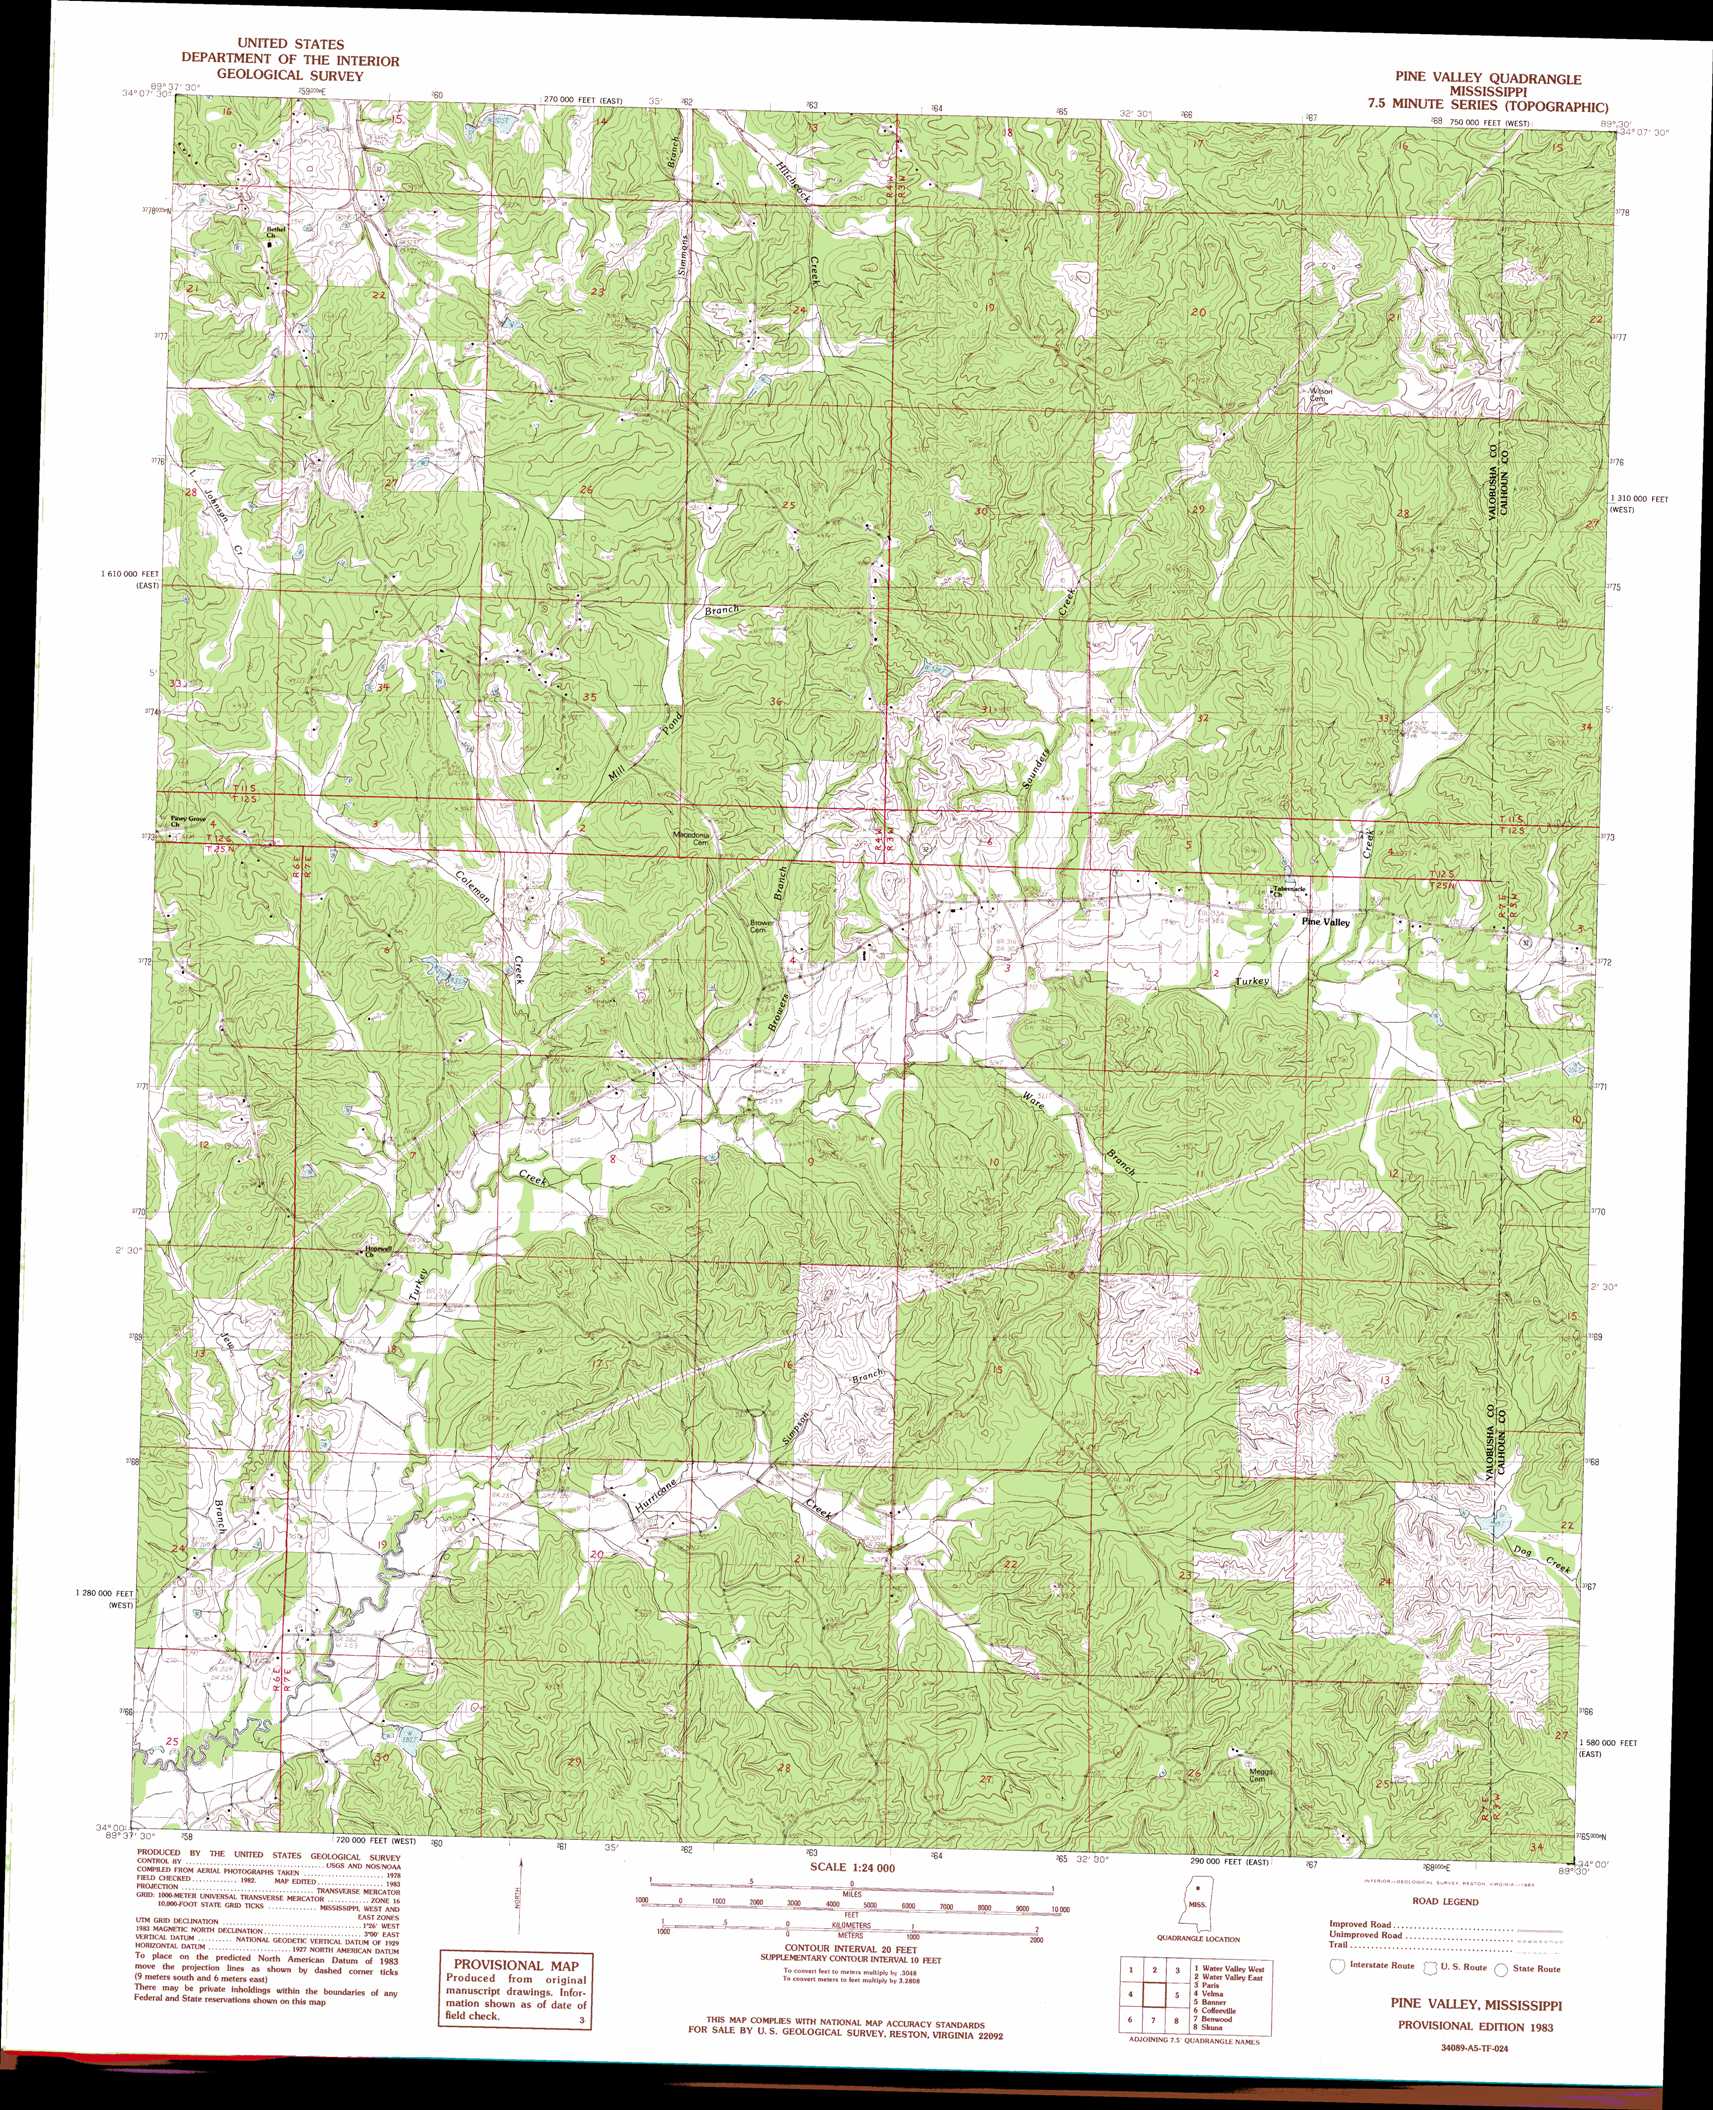 Pine Valley topographic map, MS - USGS Topo Quad 34089a5